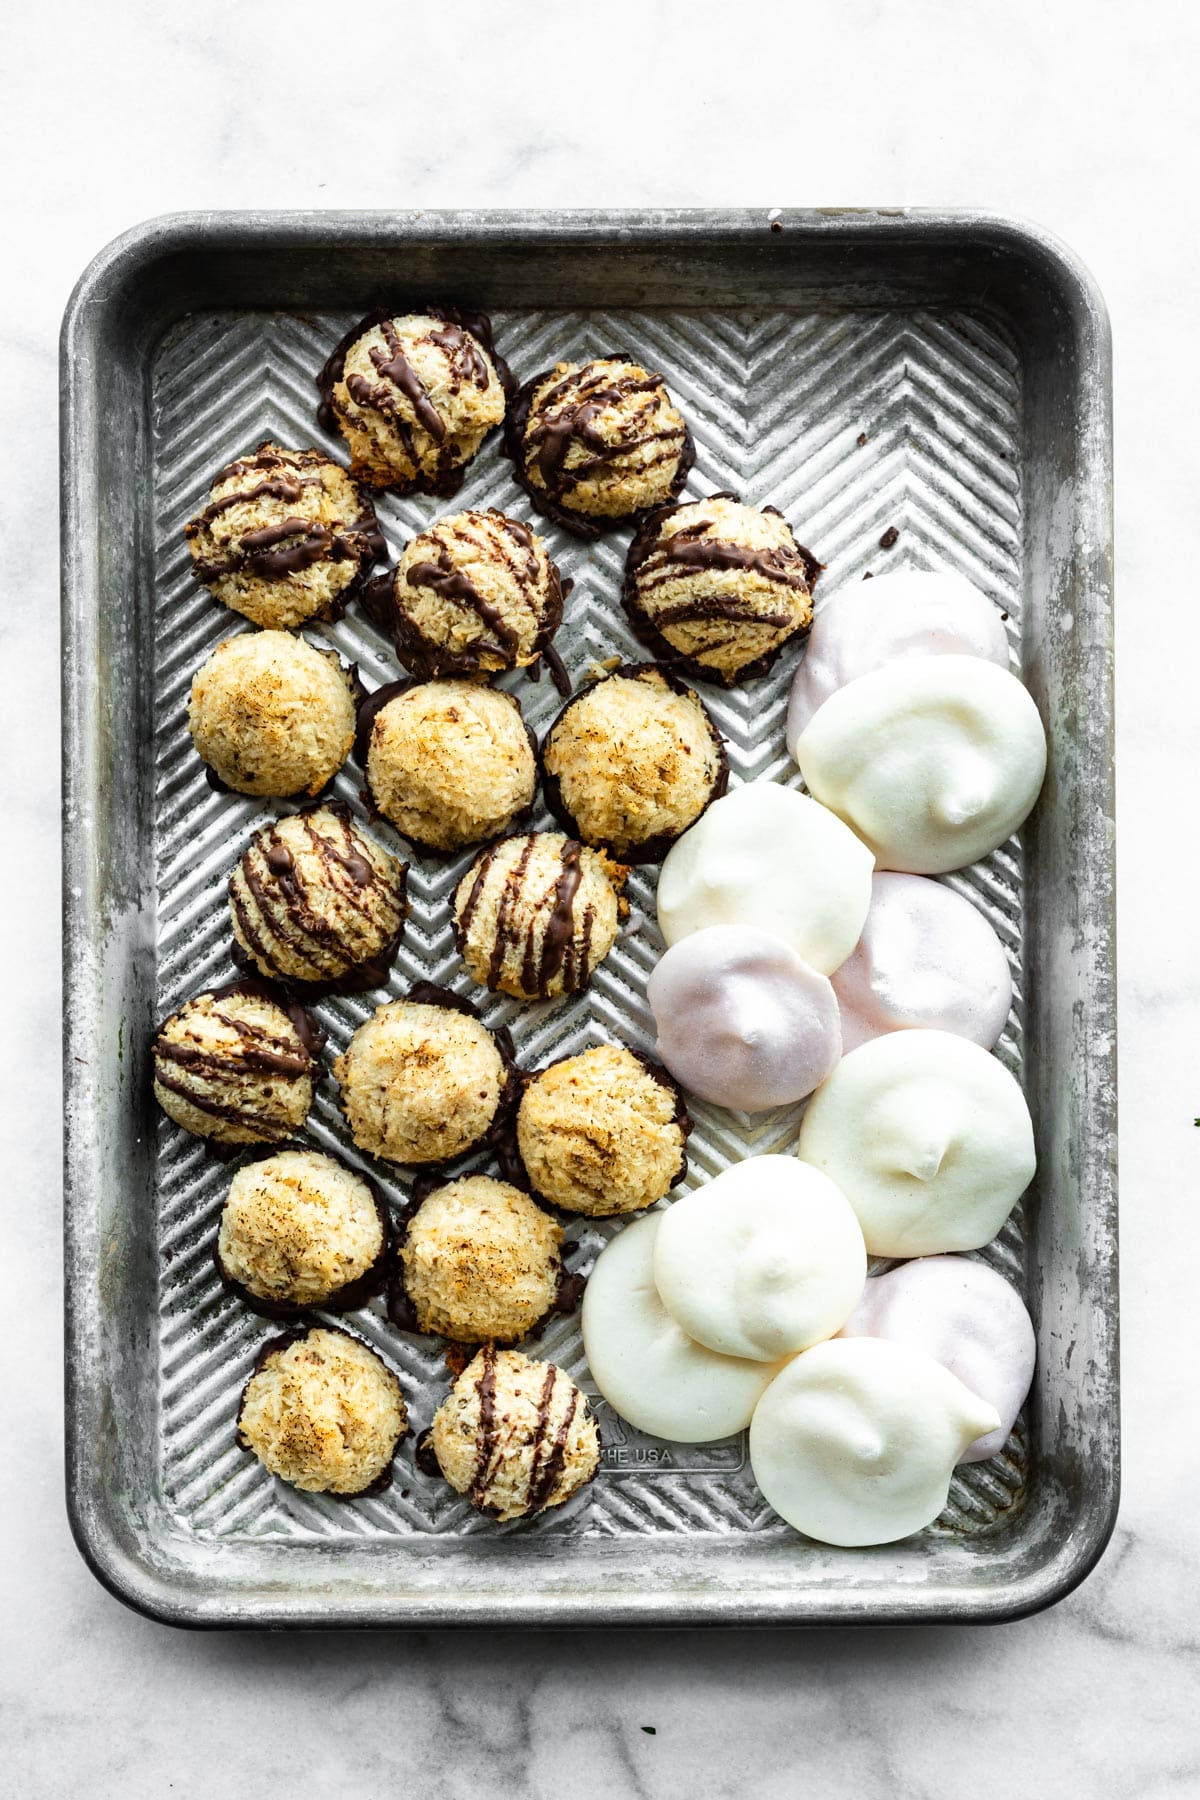 coconut macaroons and meringue cookies made with aqufaba